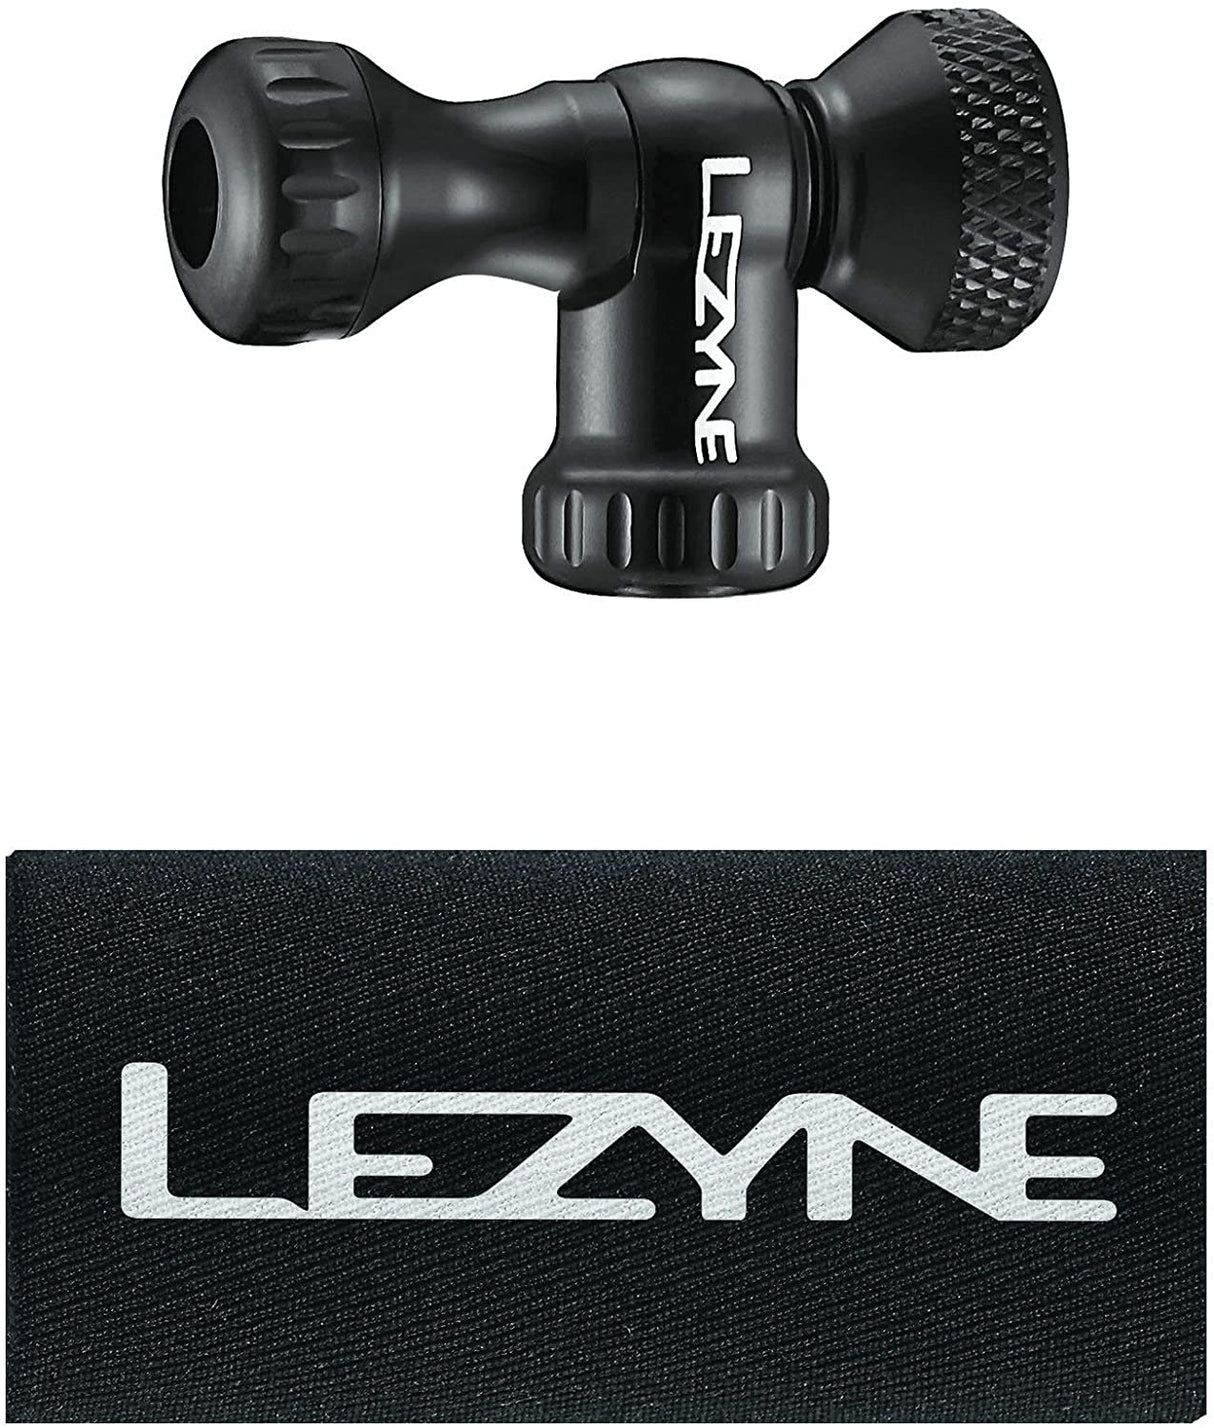 LEZYNE Control Drive C02 Bicycle Tire Inflator, Head Only, Black Inflation Full Catalog Lezyne